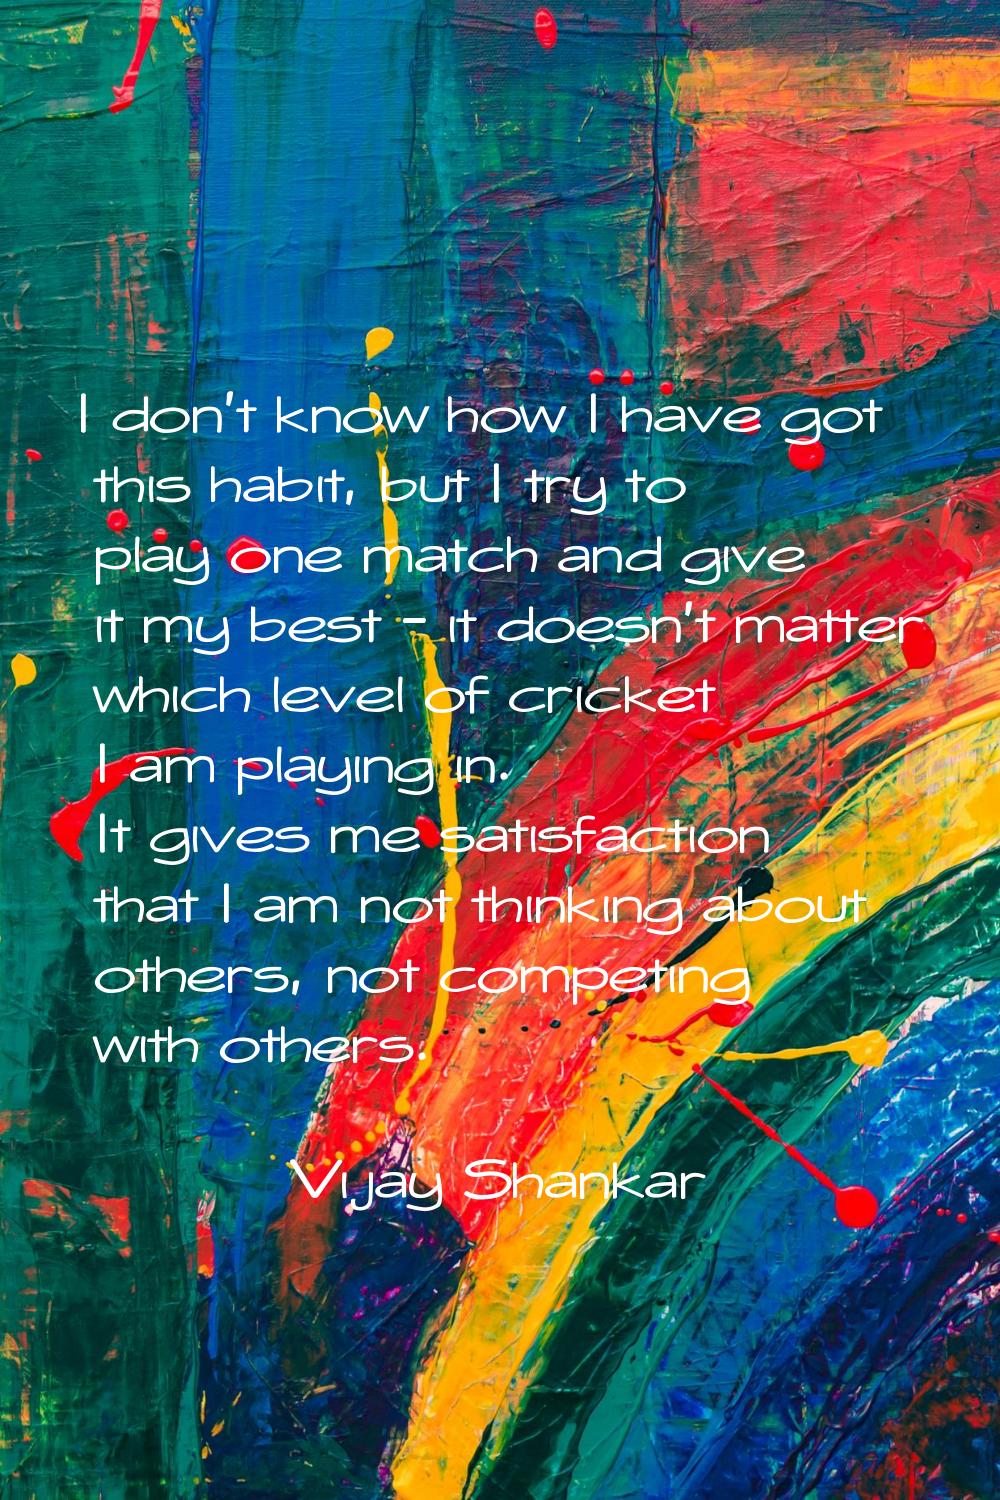 I don't know how I have got this habit, but I try to play one match and give it my best - it doesn'